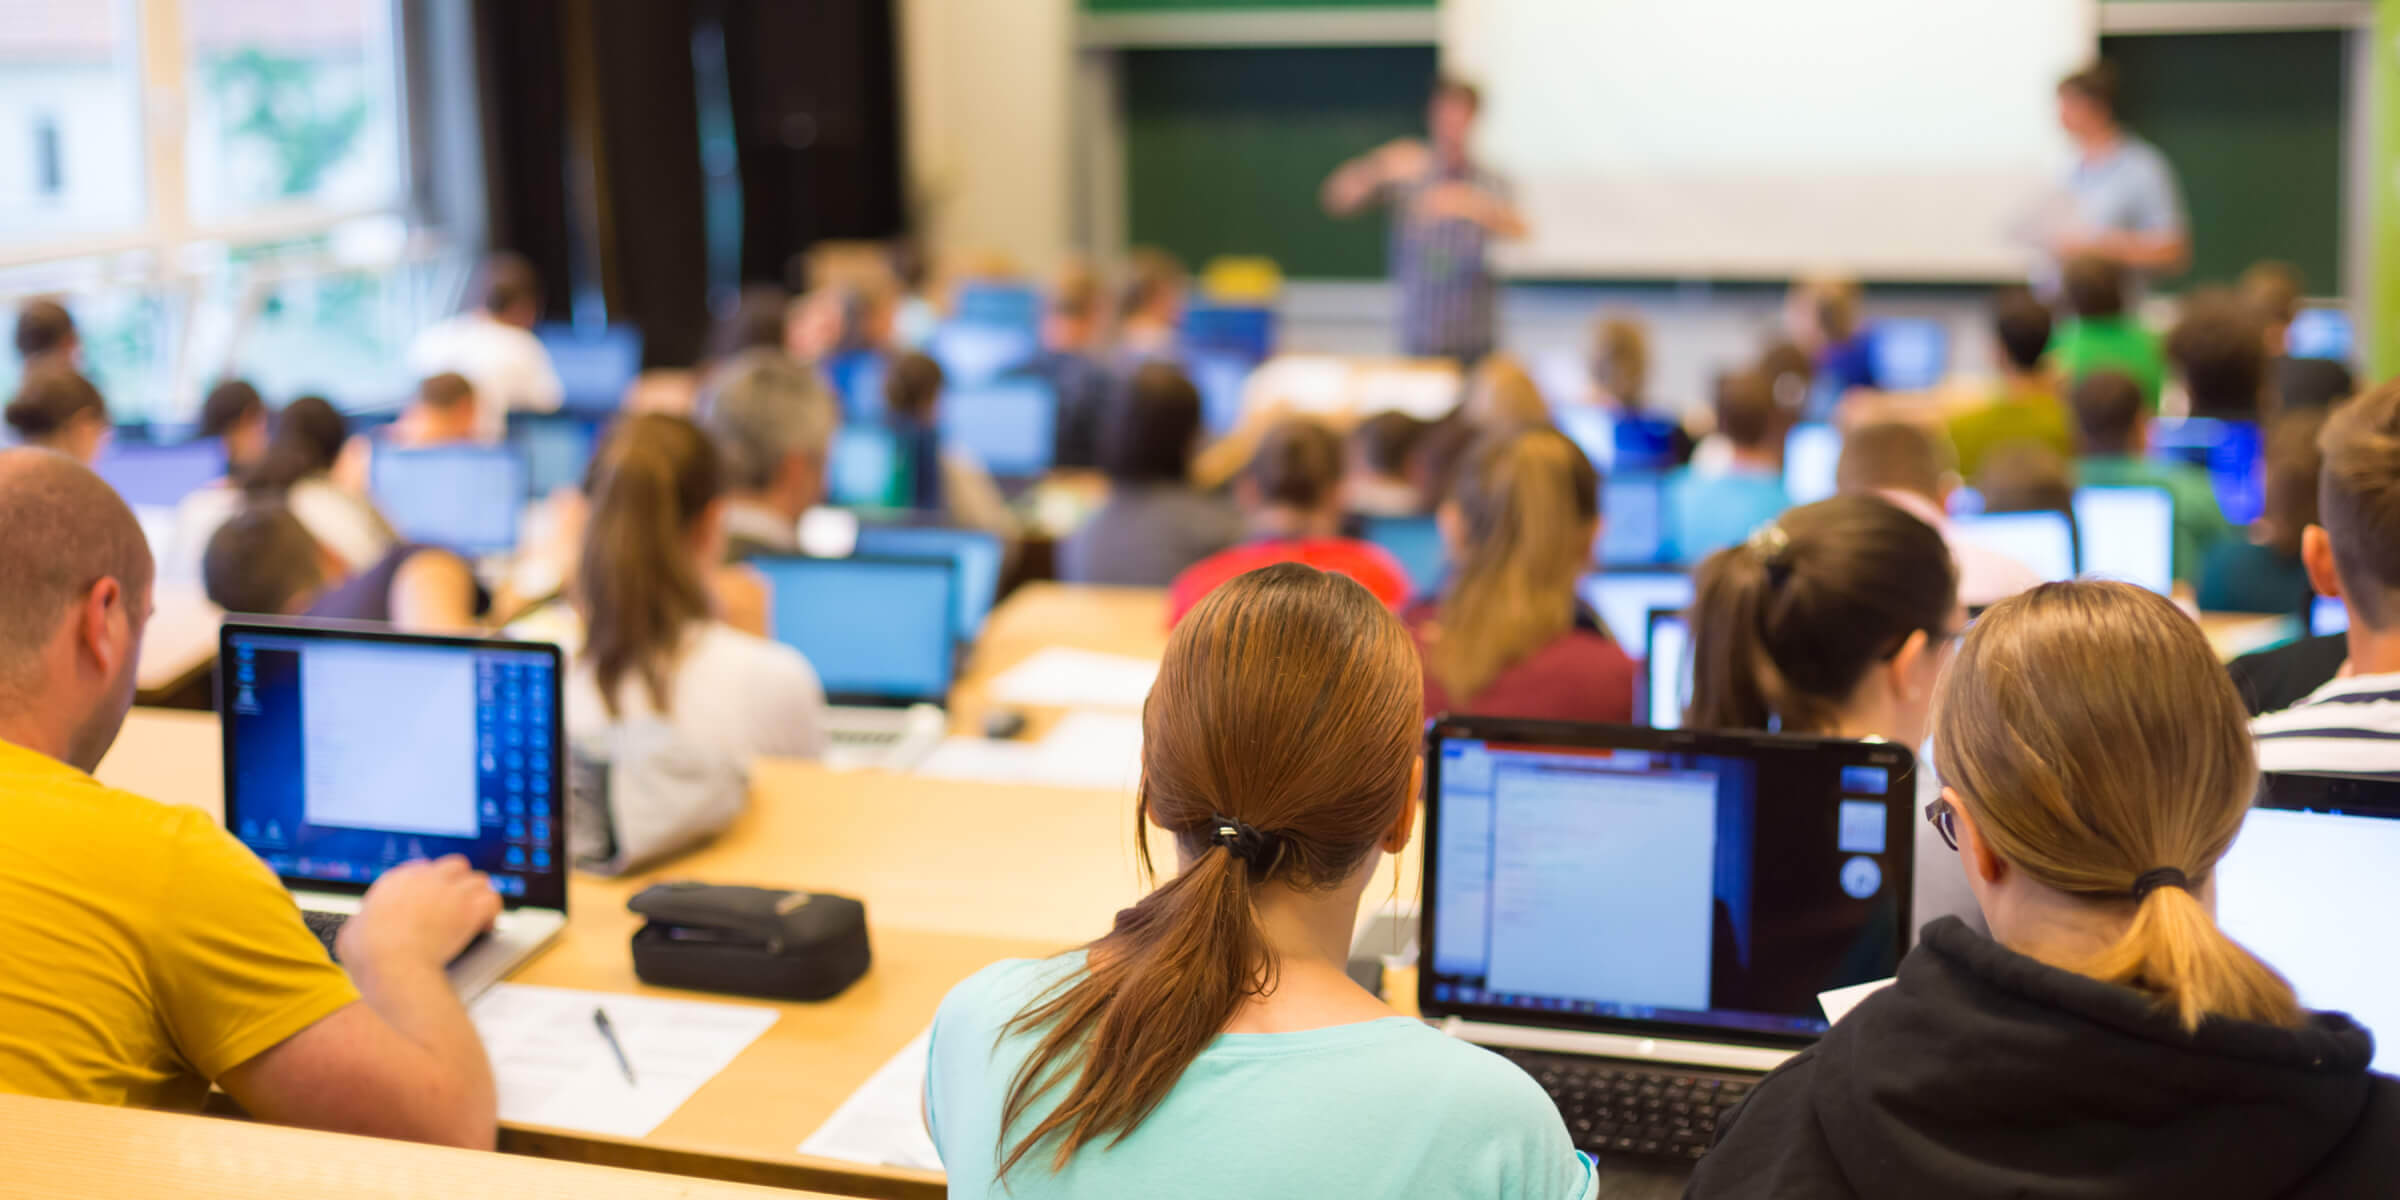 Making Smart Choices About Tech In The Classroom